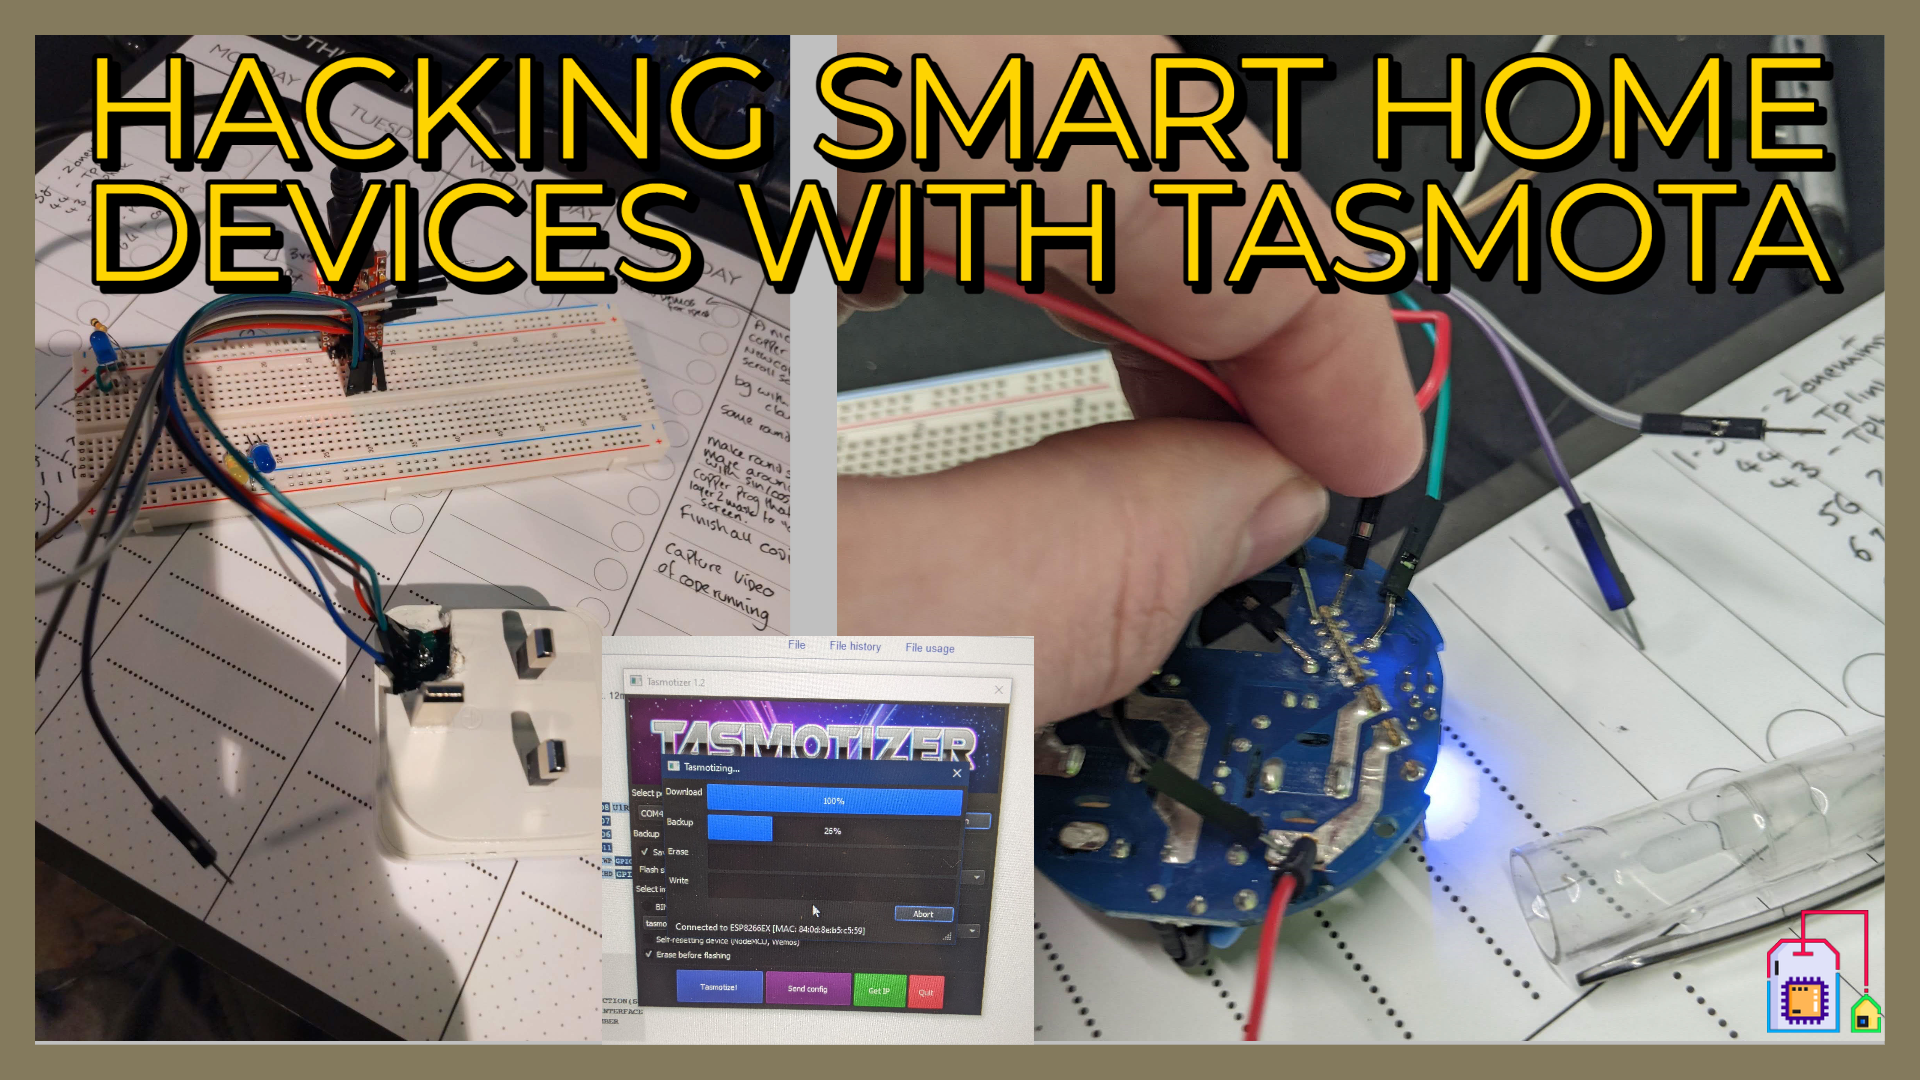 Freeing Smart Devices With Tasmota